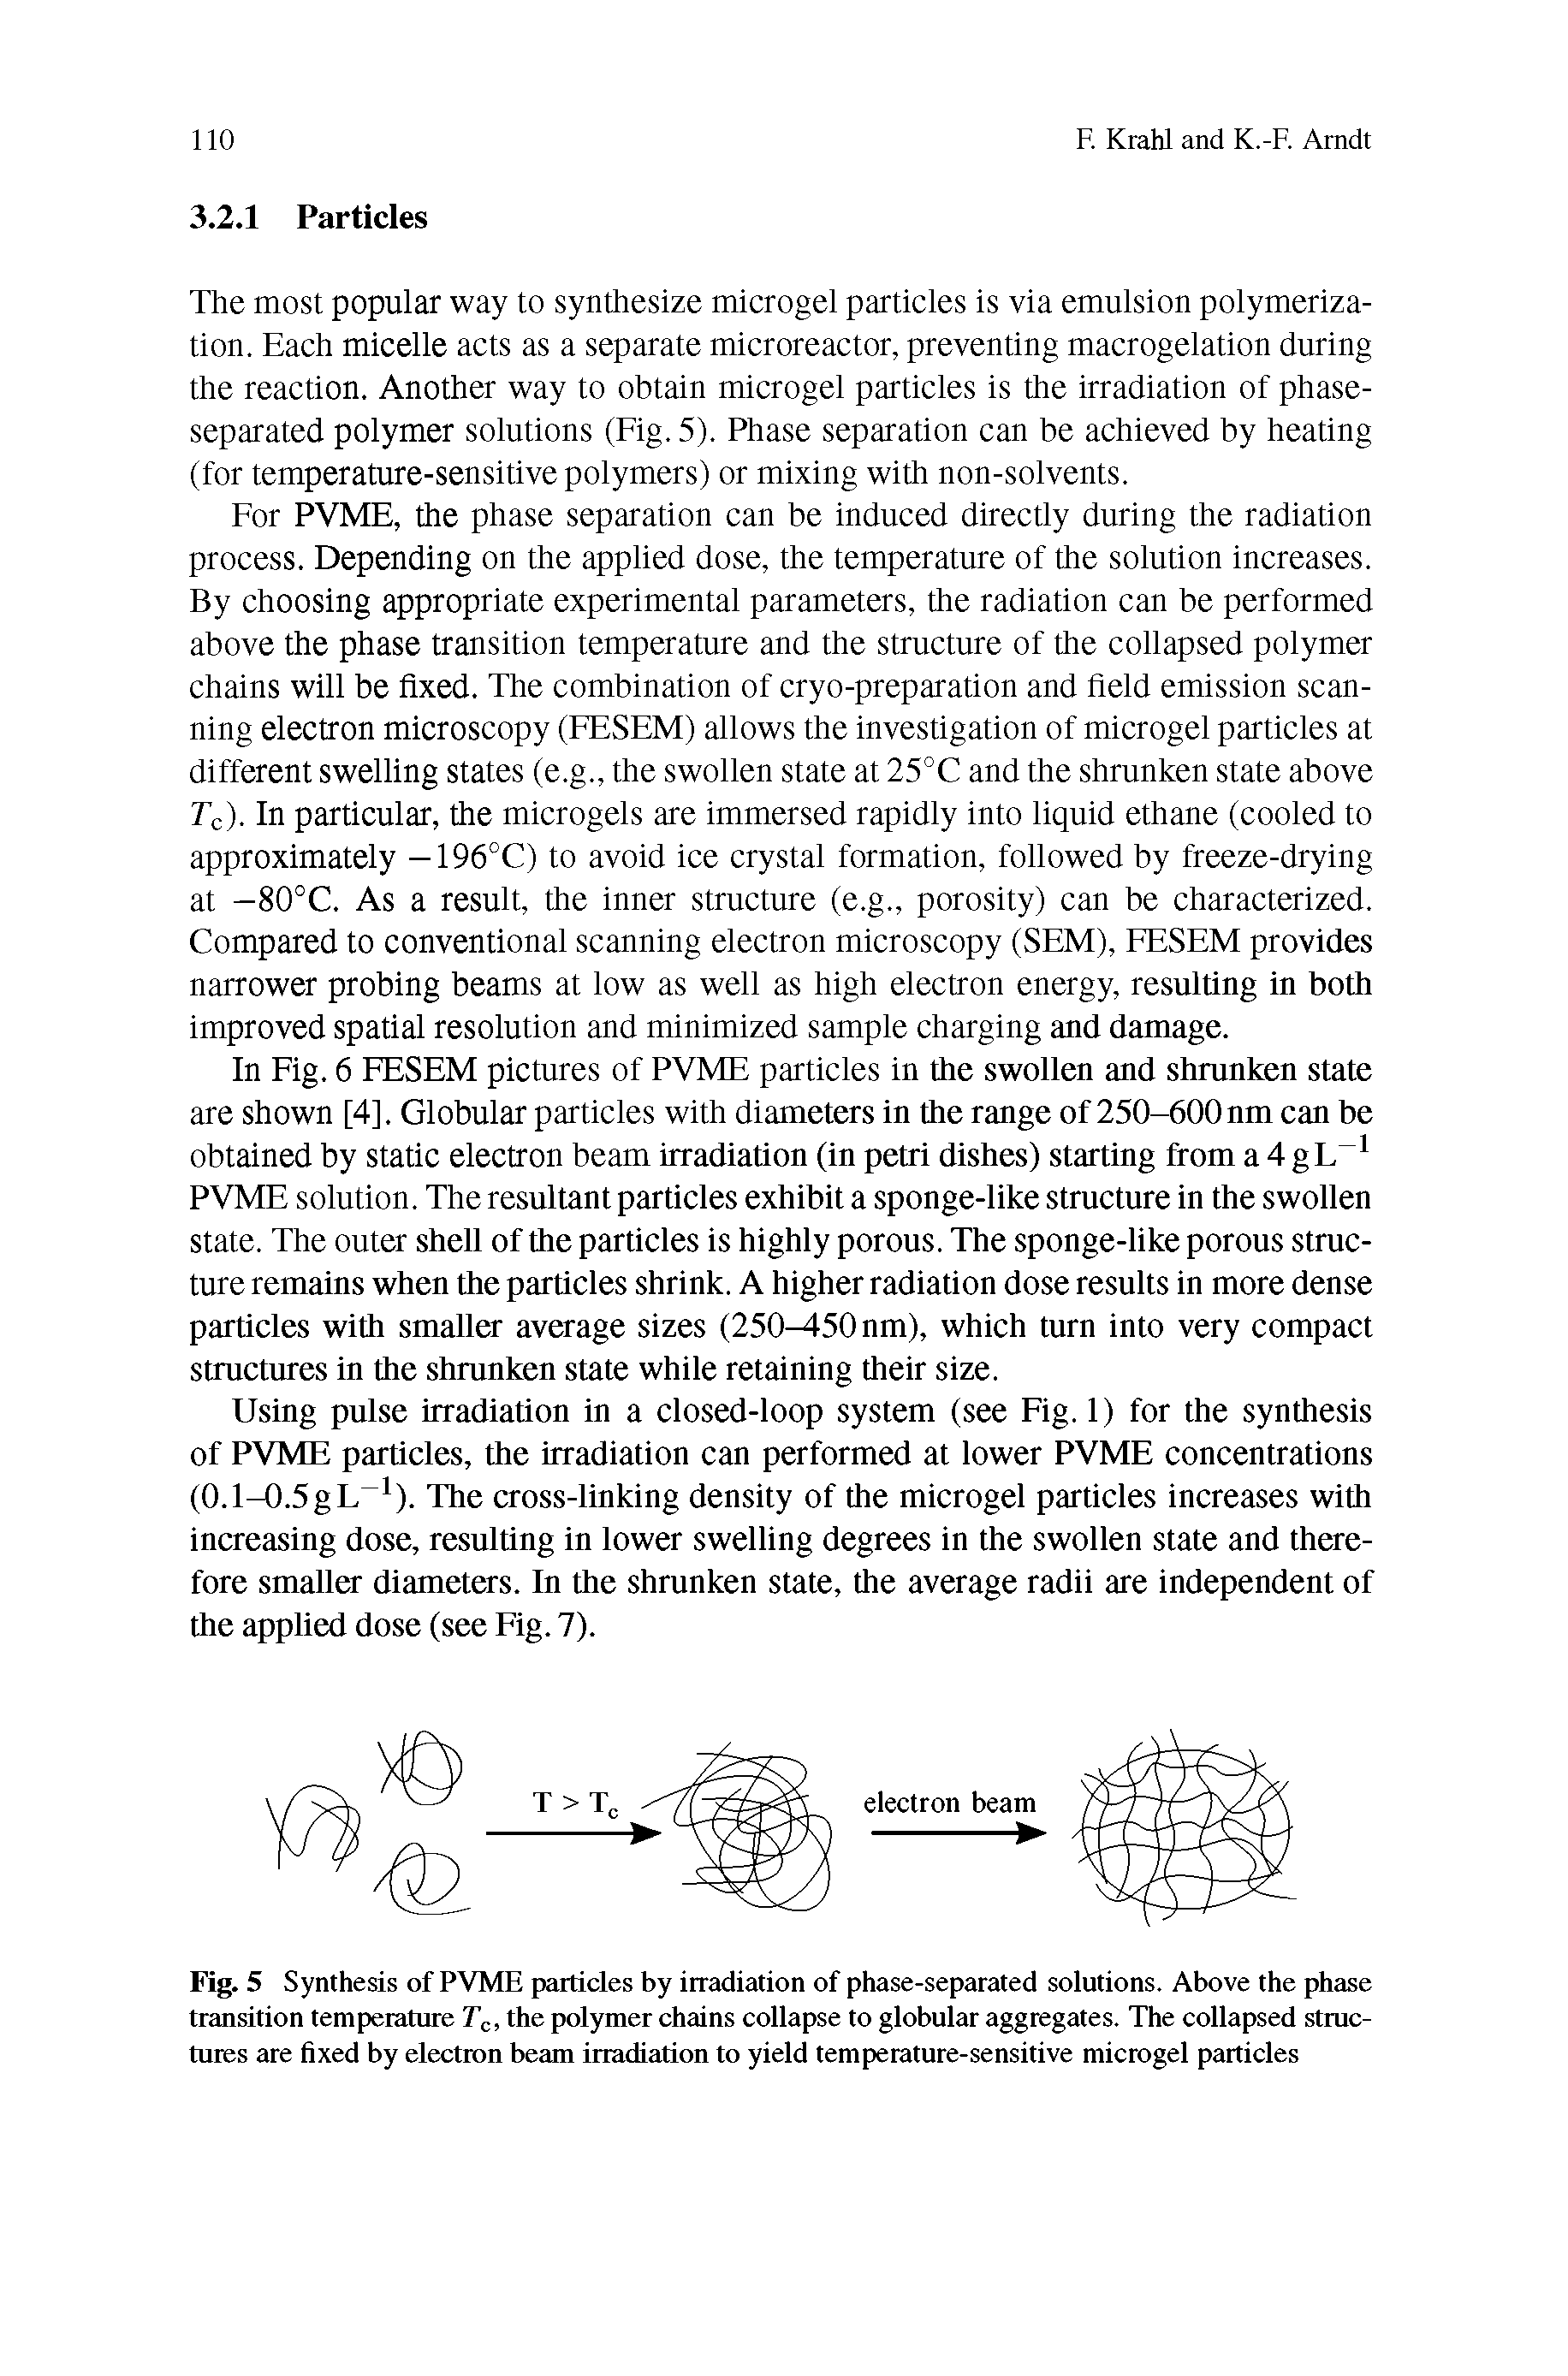 Fig. 5 Synthesis of PVME particles by irradiation of phase-separated solutions. Above the phase transition temperature Tc, the polymer chains collapse to globular aggregates. The collapsed structures are fixed by electron beam irradiation to yield temperature-sensitive microgel particles...